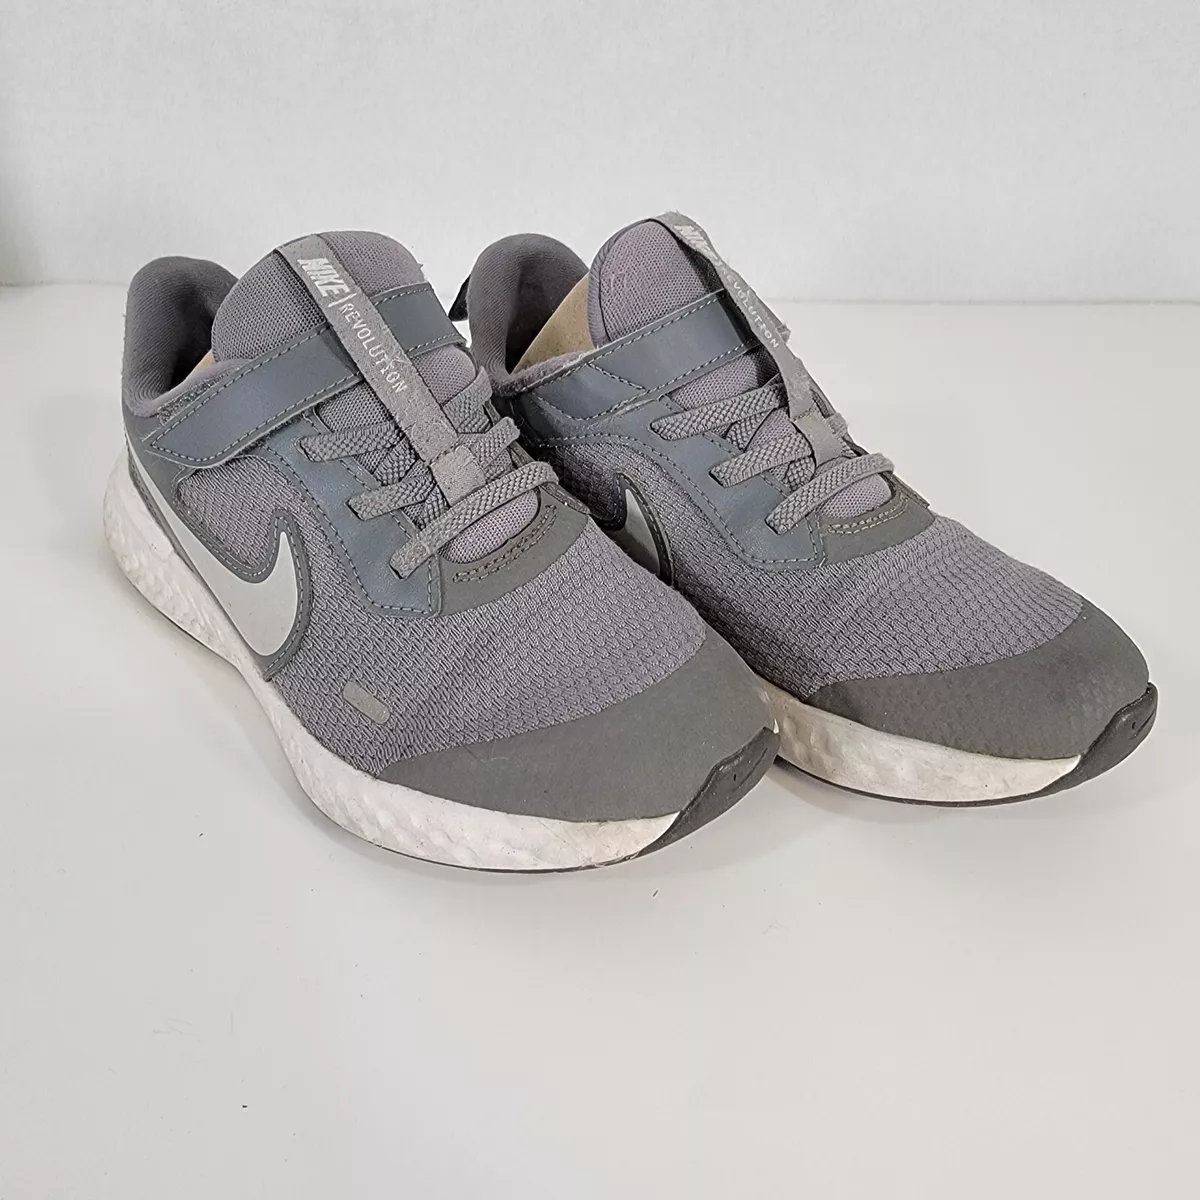 Nike Boys Revolution Running Shoes Sneakers Size 3Y | eBay